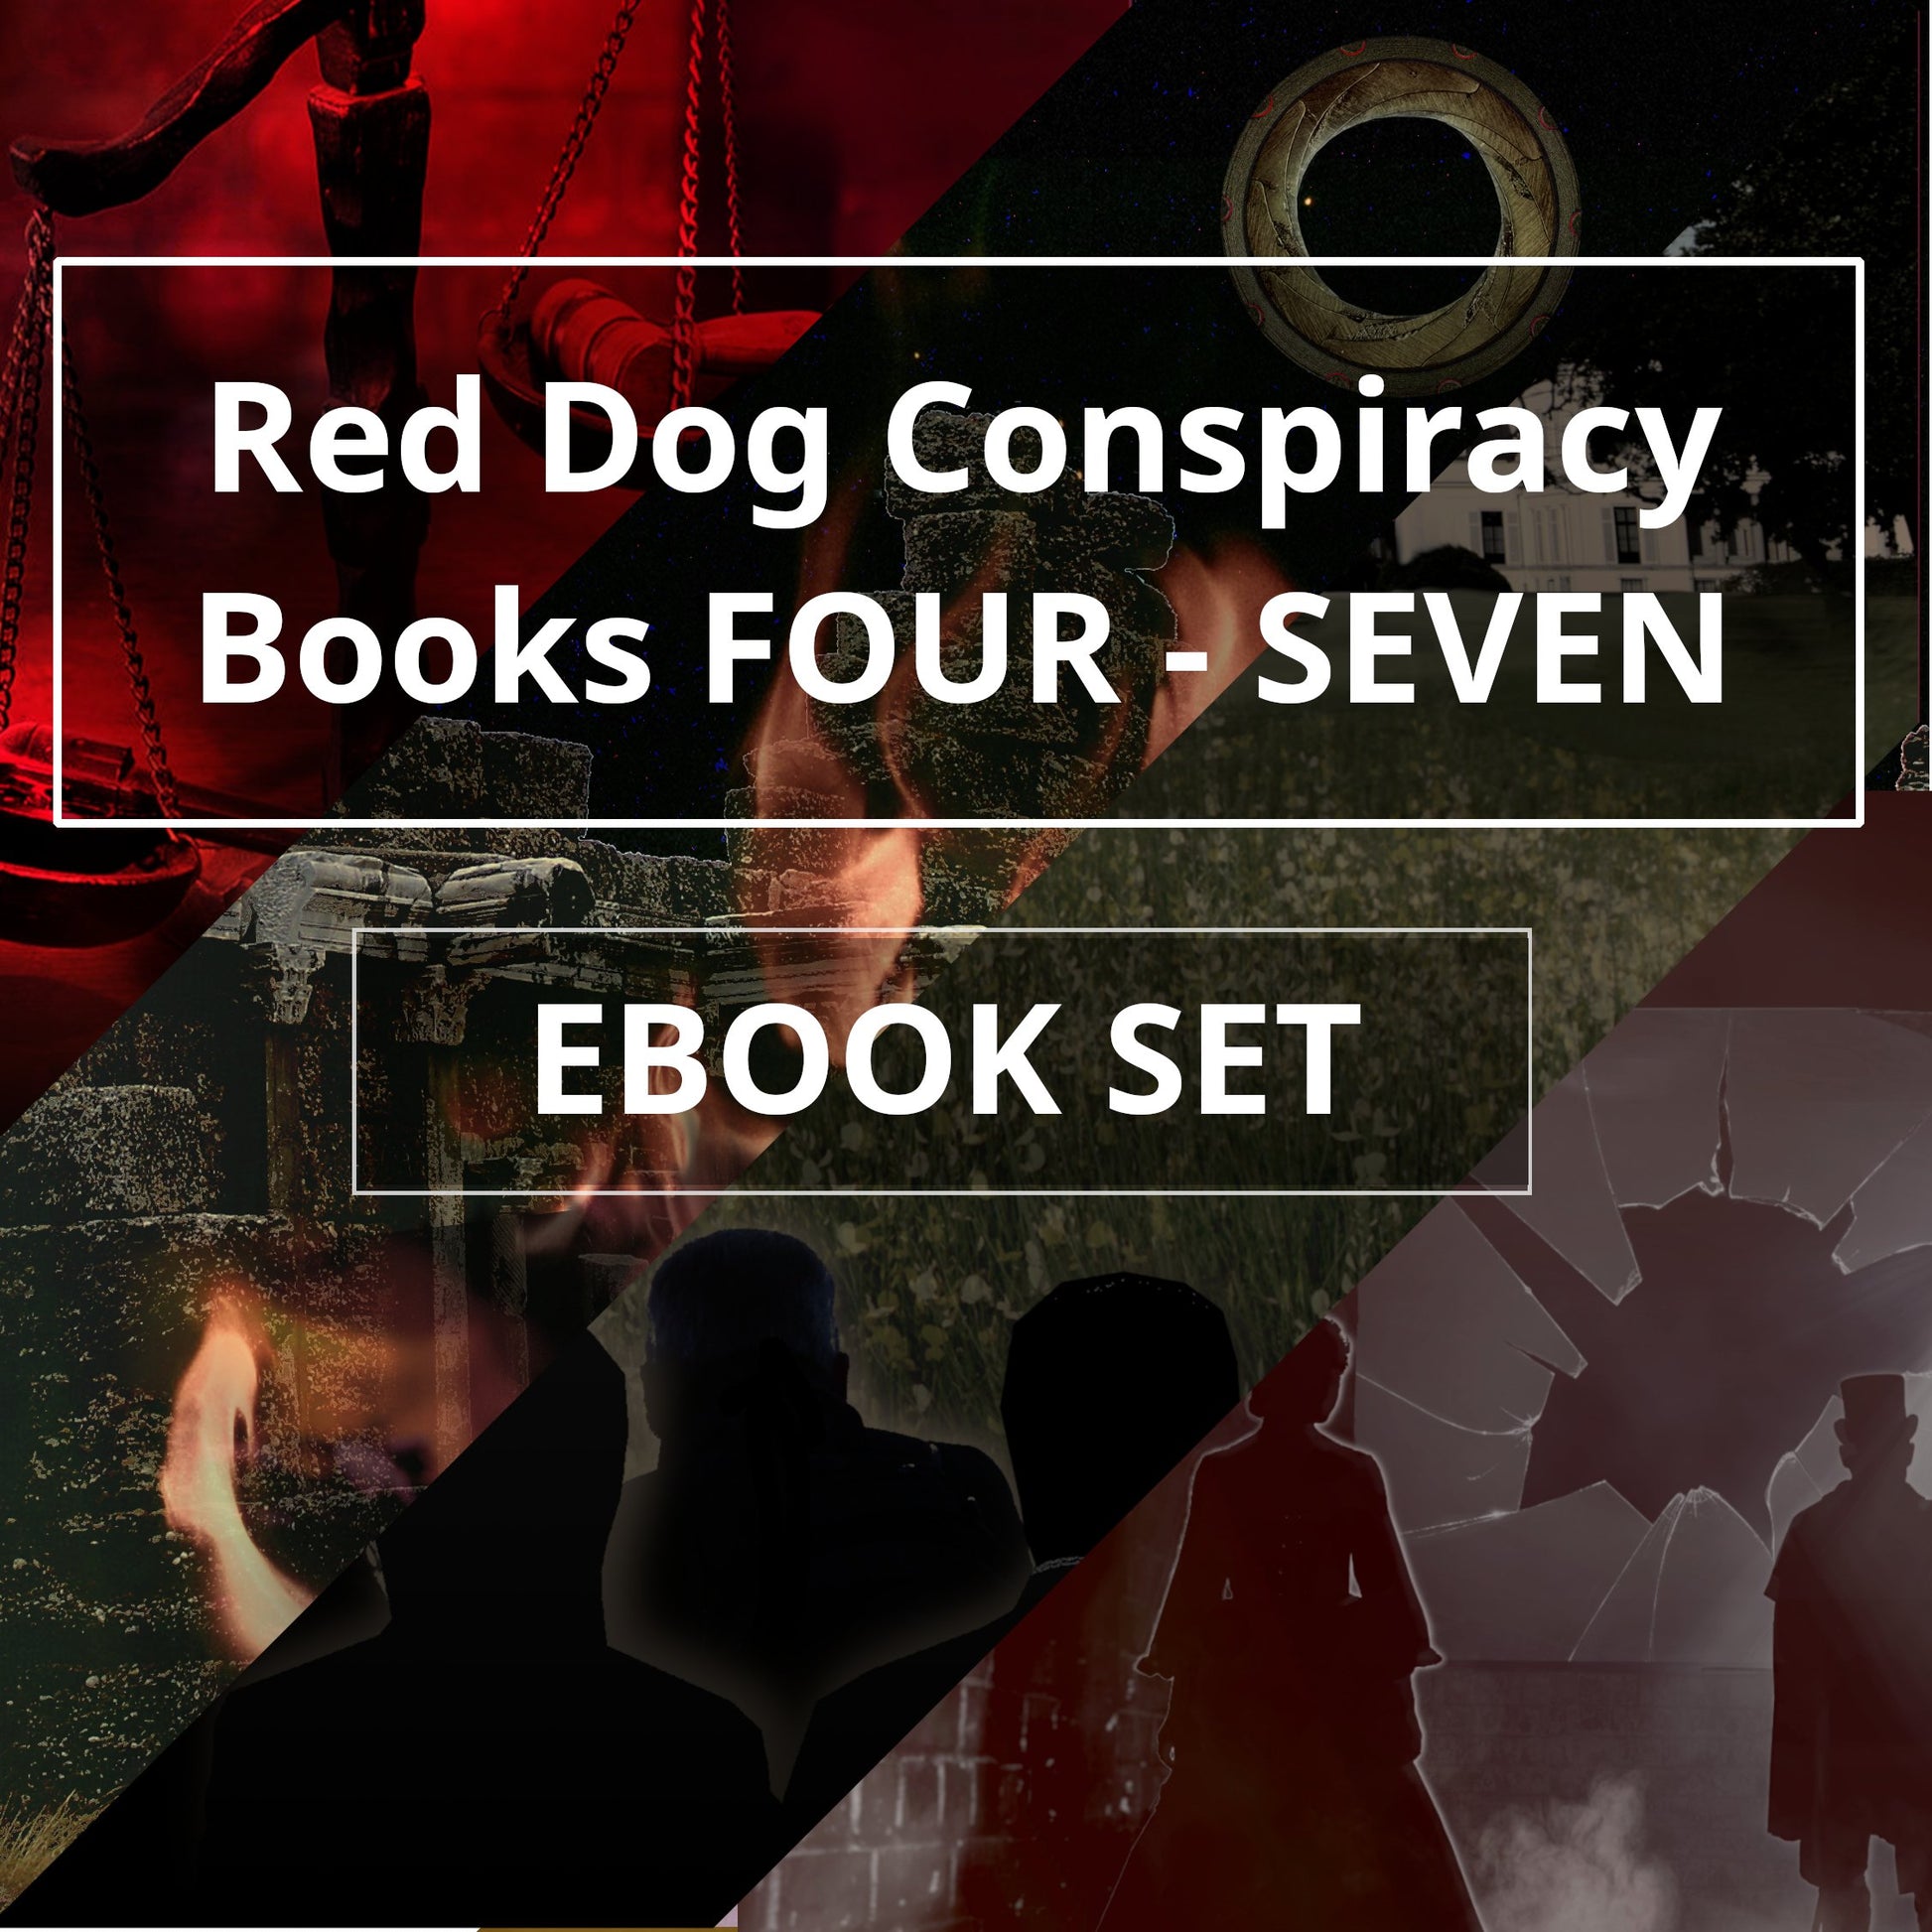 Red Dog Conspiracy Act 2A ebook - Patricia Loofbourrow